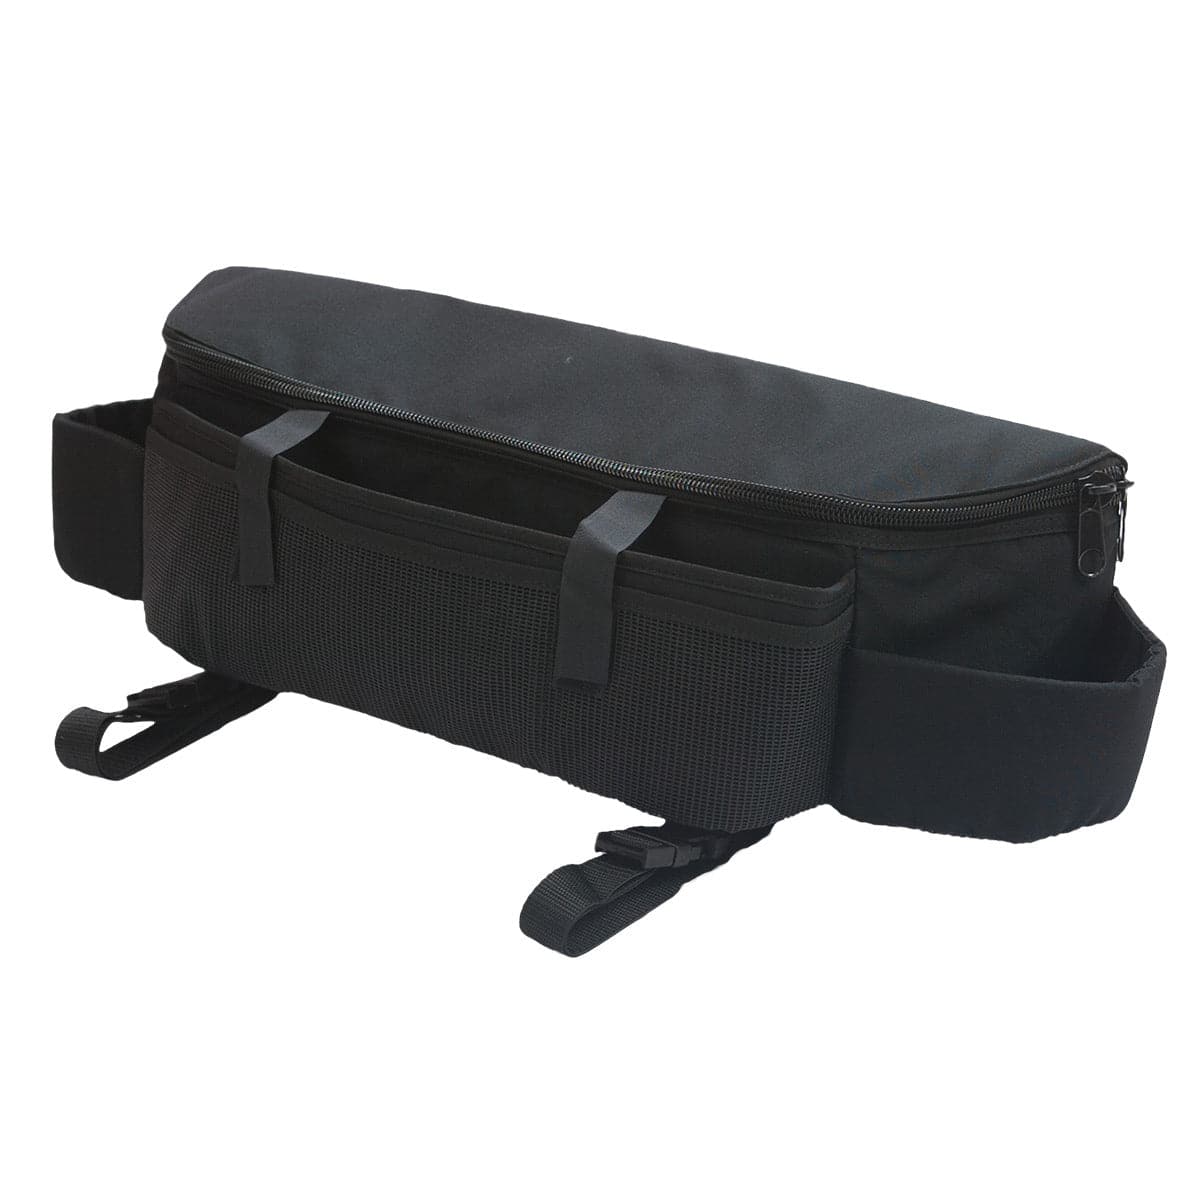 Featuring the Deluxe Cargo Pocket raft rigging manufactured by AIRE shown here from one angle.